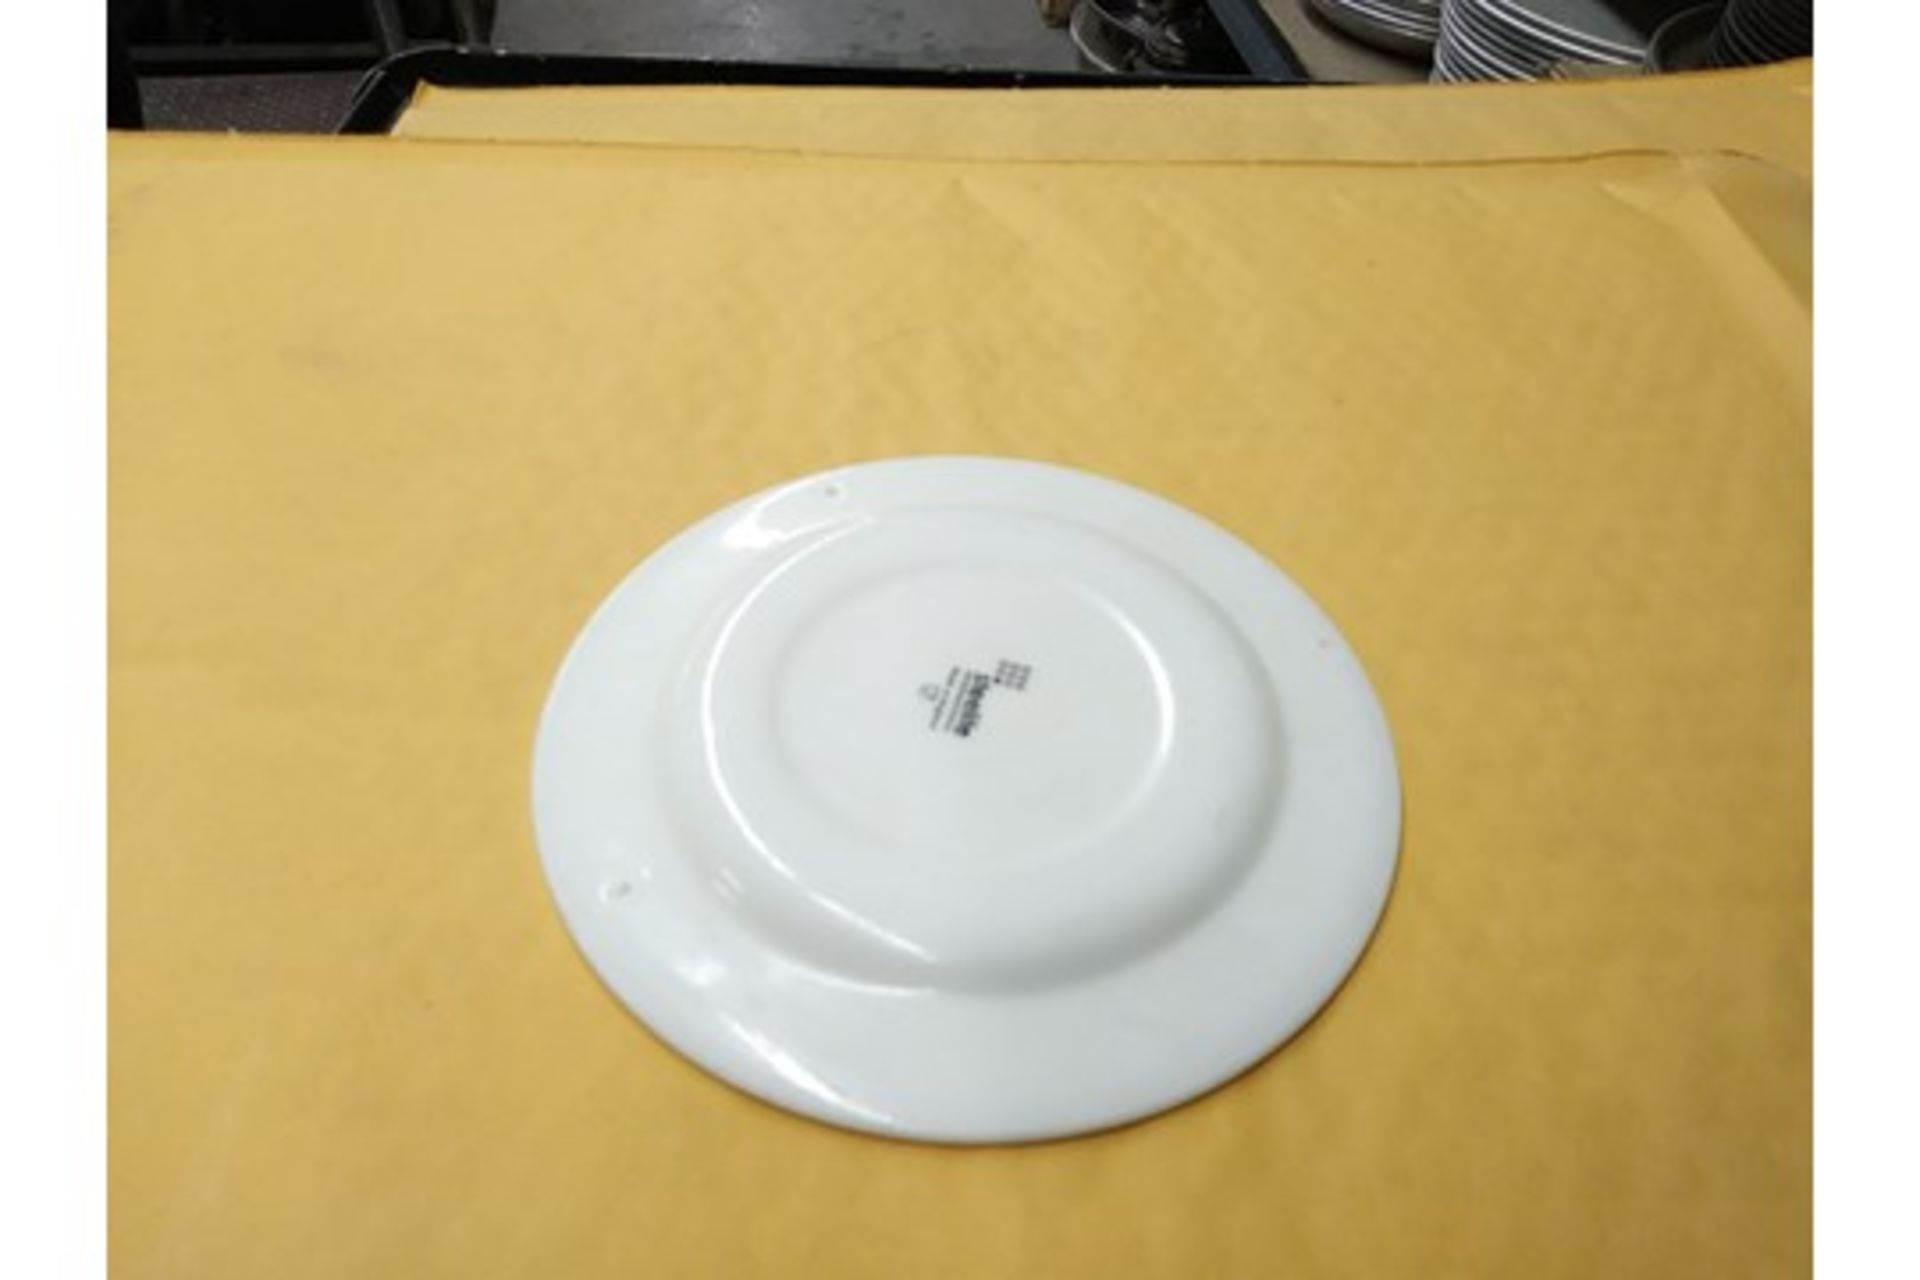 6" STEELITE PLATE (includes approx QTY 55 in this lot) - Image 2 of 2